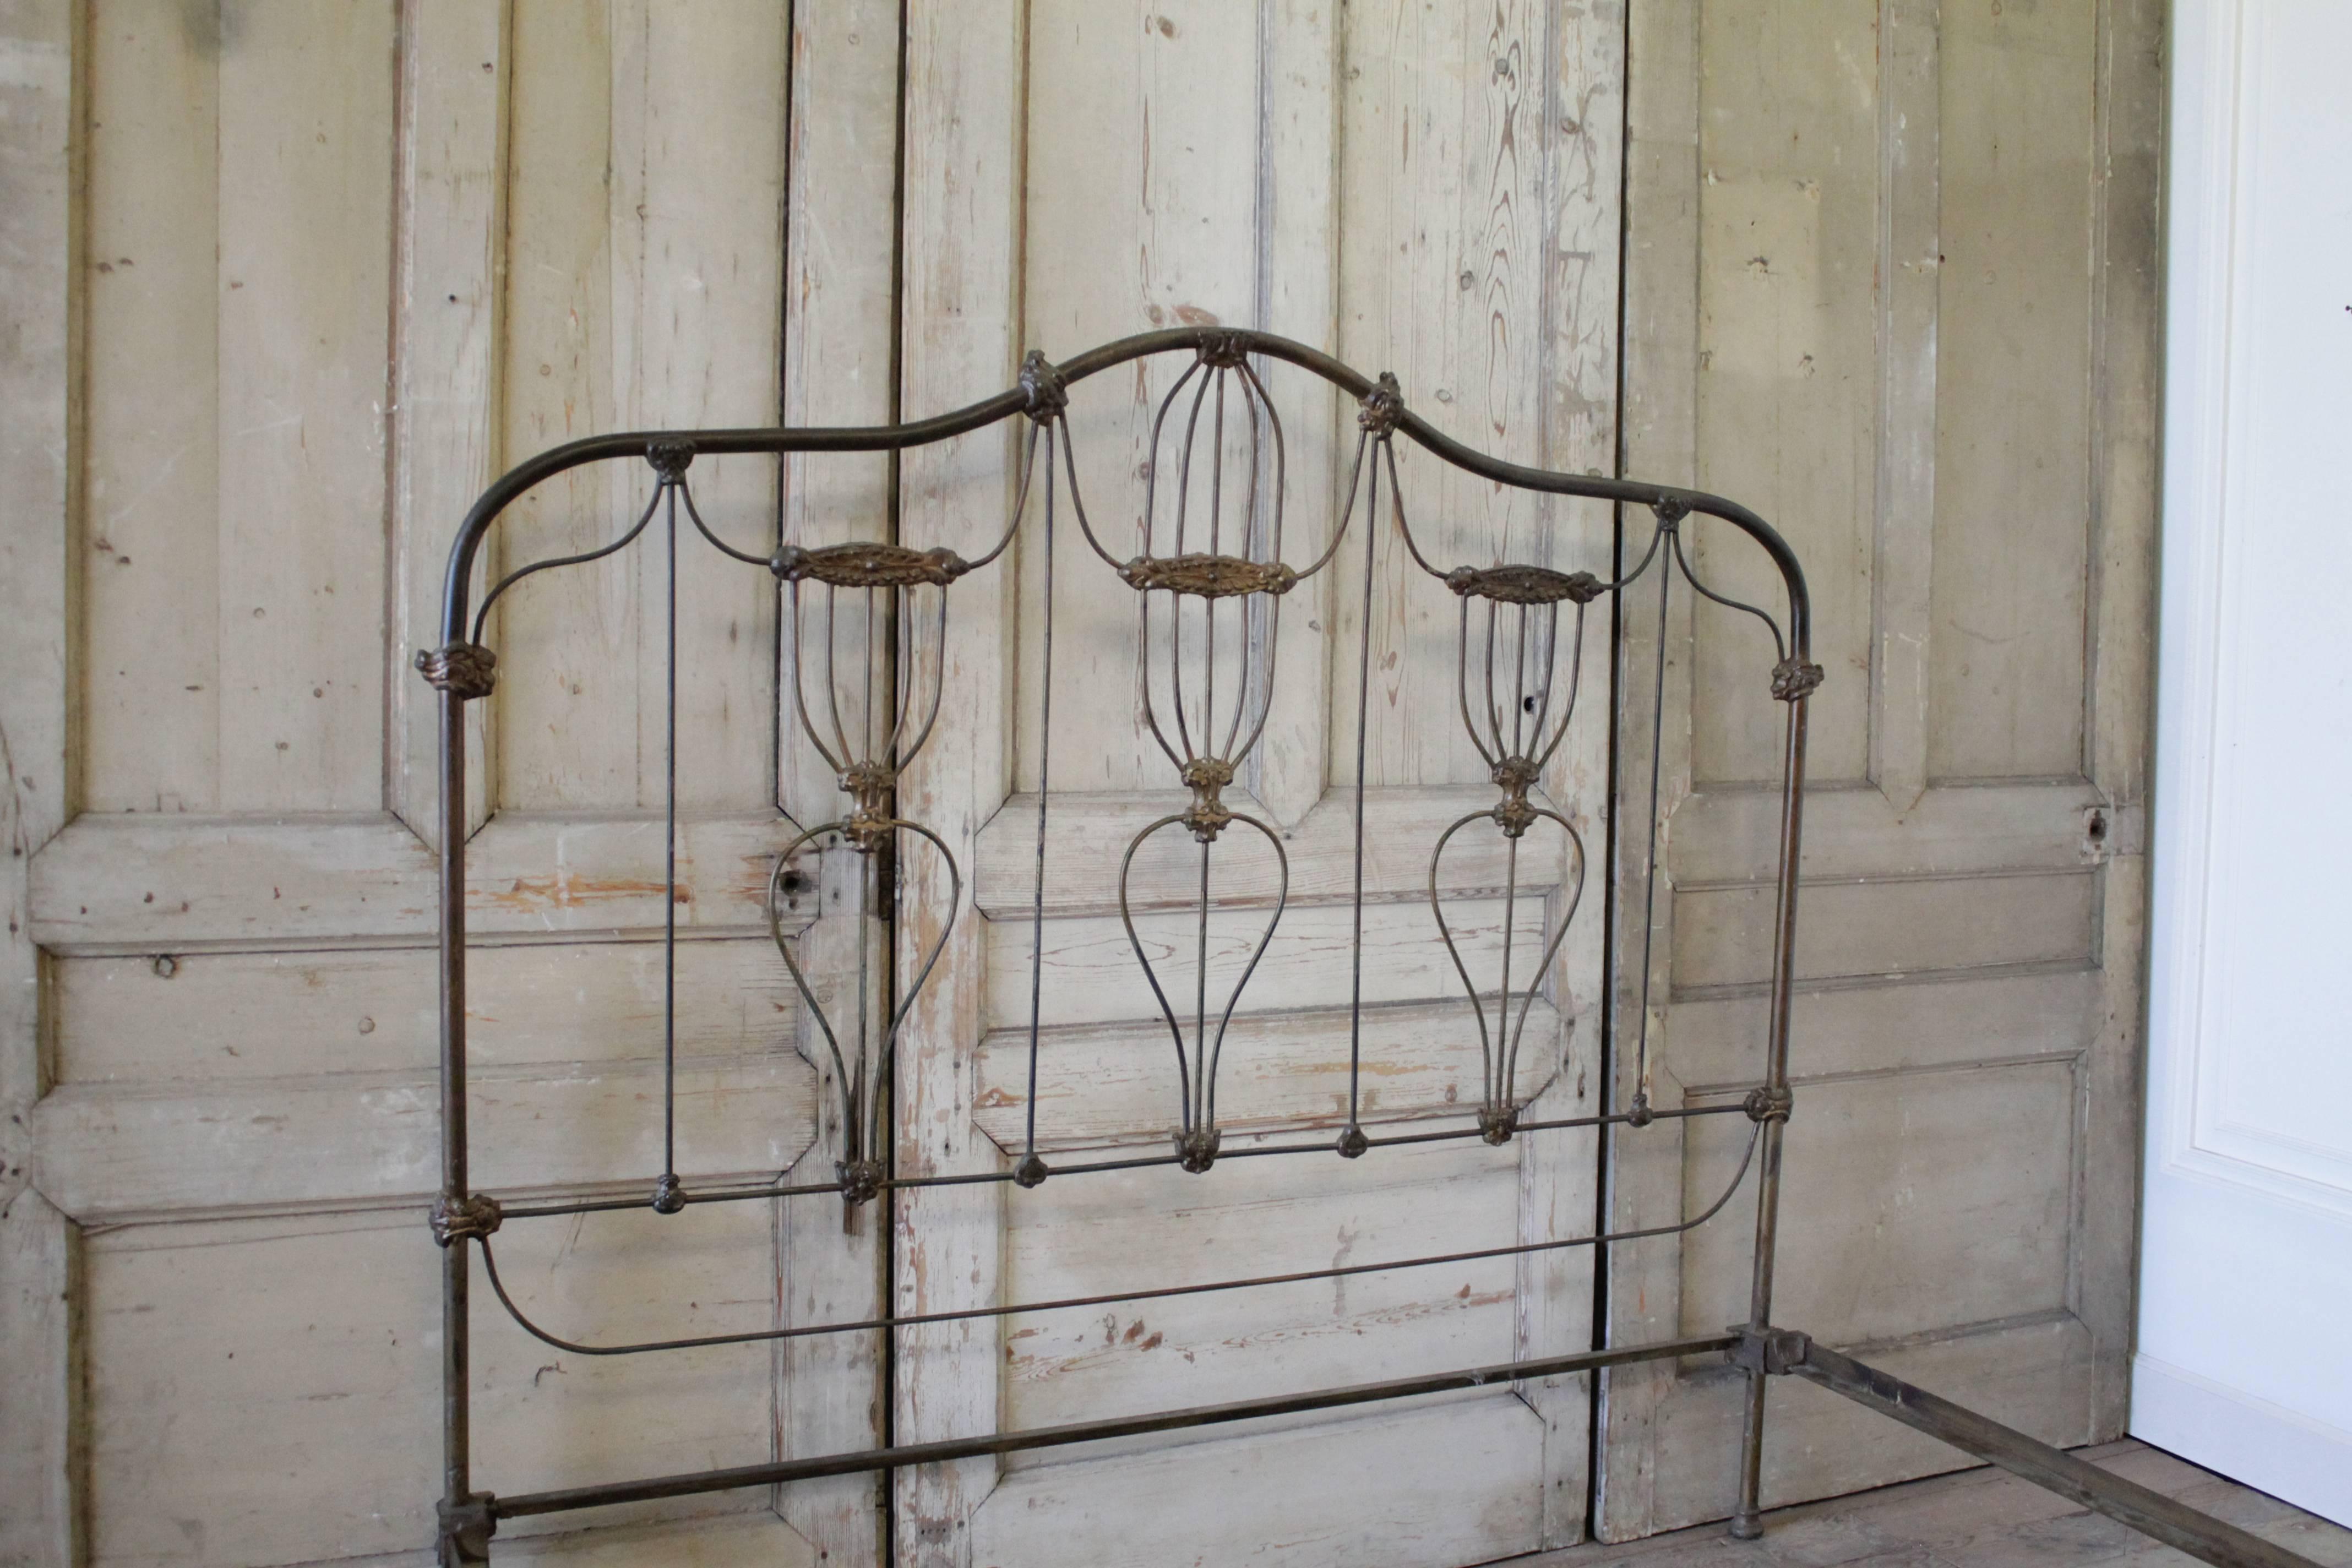 American Antique King-Size Iron Bed